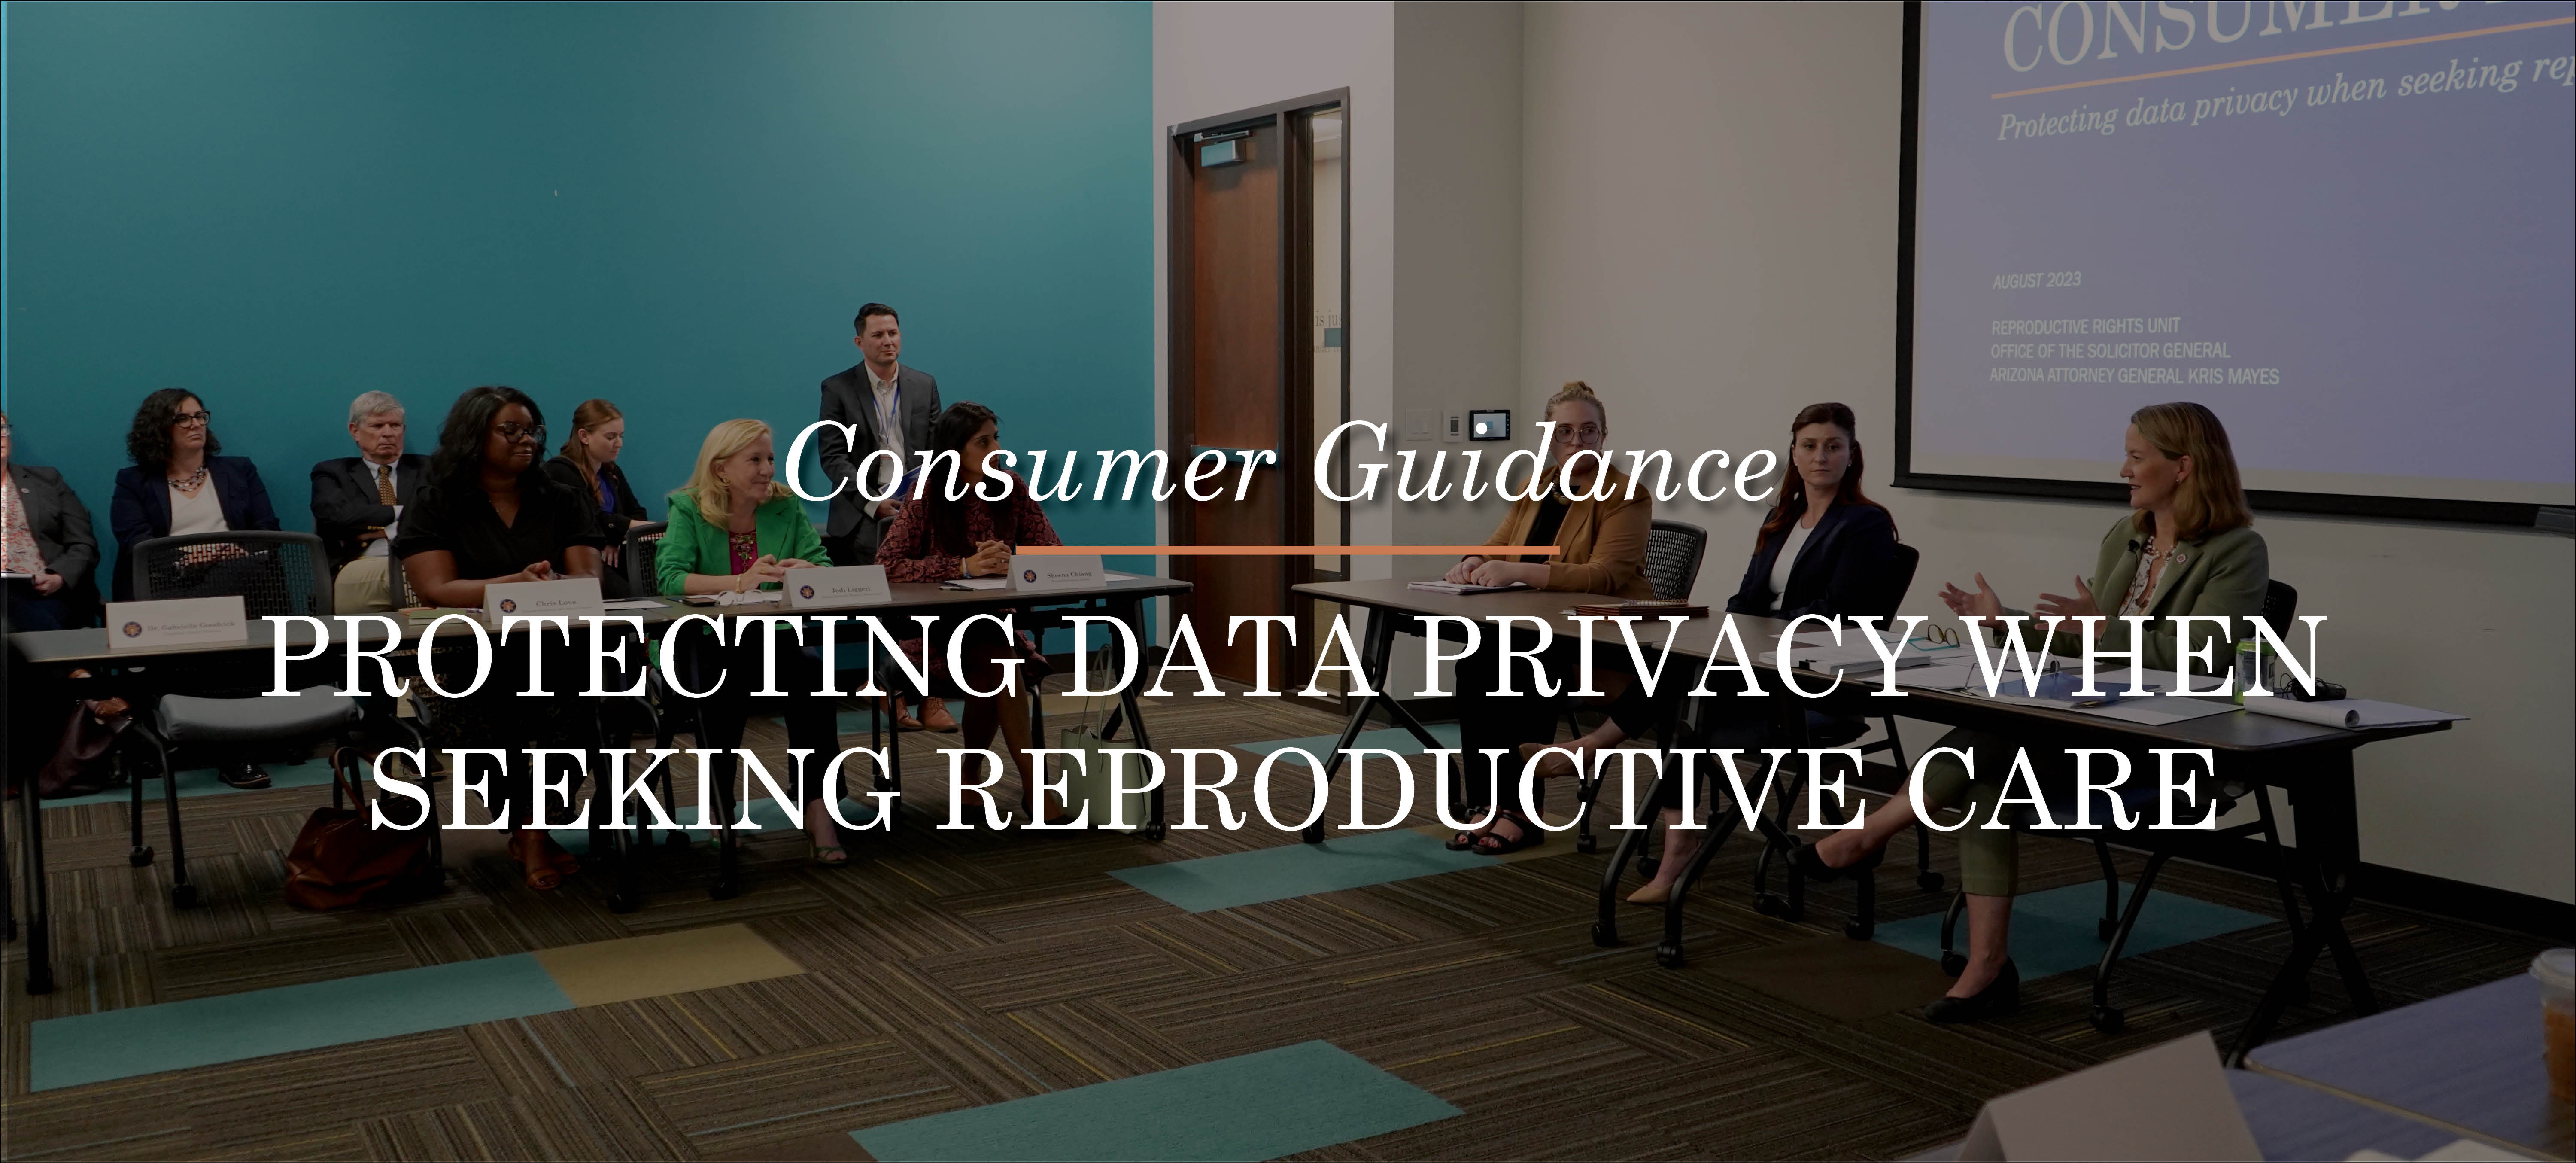 consumer guidance | protecting data privacy when seeking reproductive health care